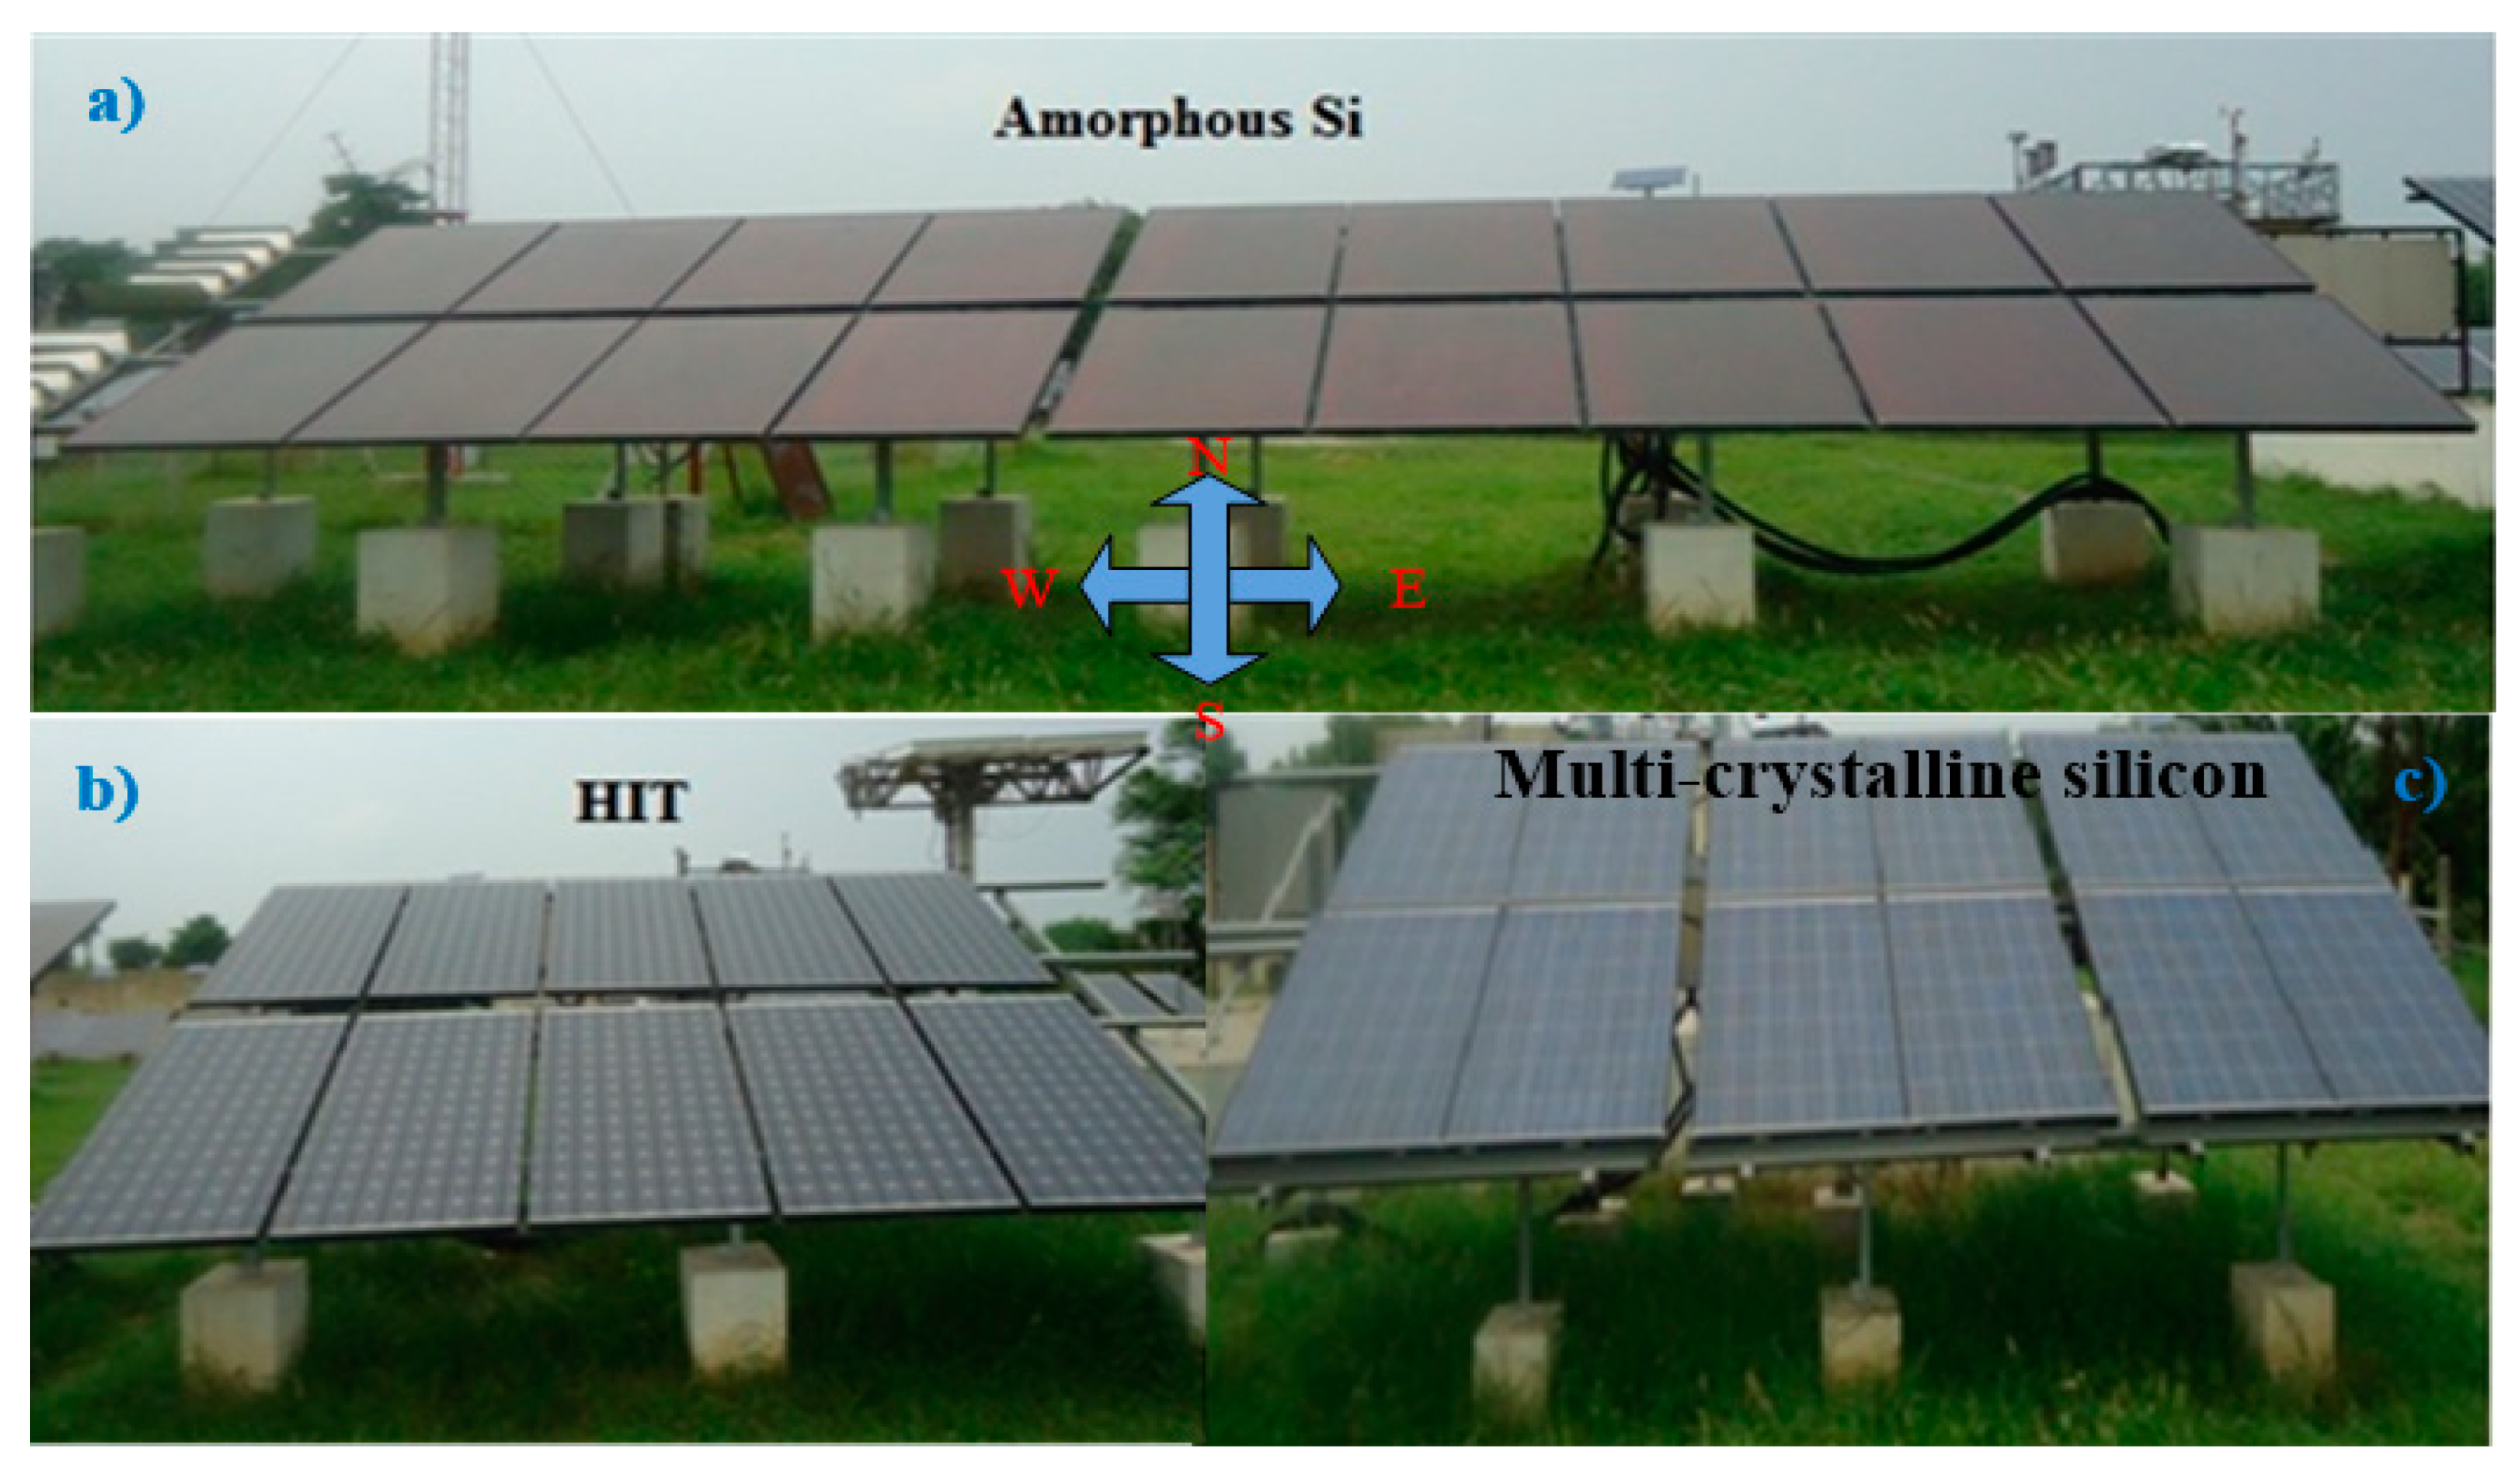 Sustainability Free Full Text Operational Performance And Degradation Influenced Life Cycle Environmental Economic Metrics Of Mc Si A Si And Hit Photovoltaic Arrays In Hot Semi Arid Climates Html